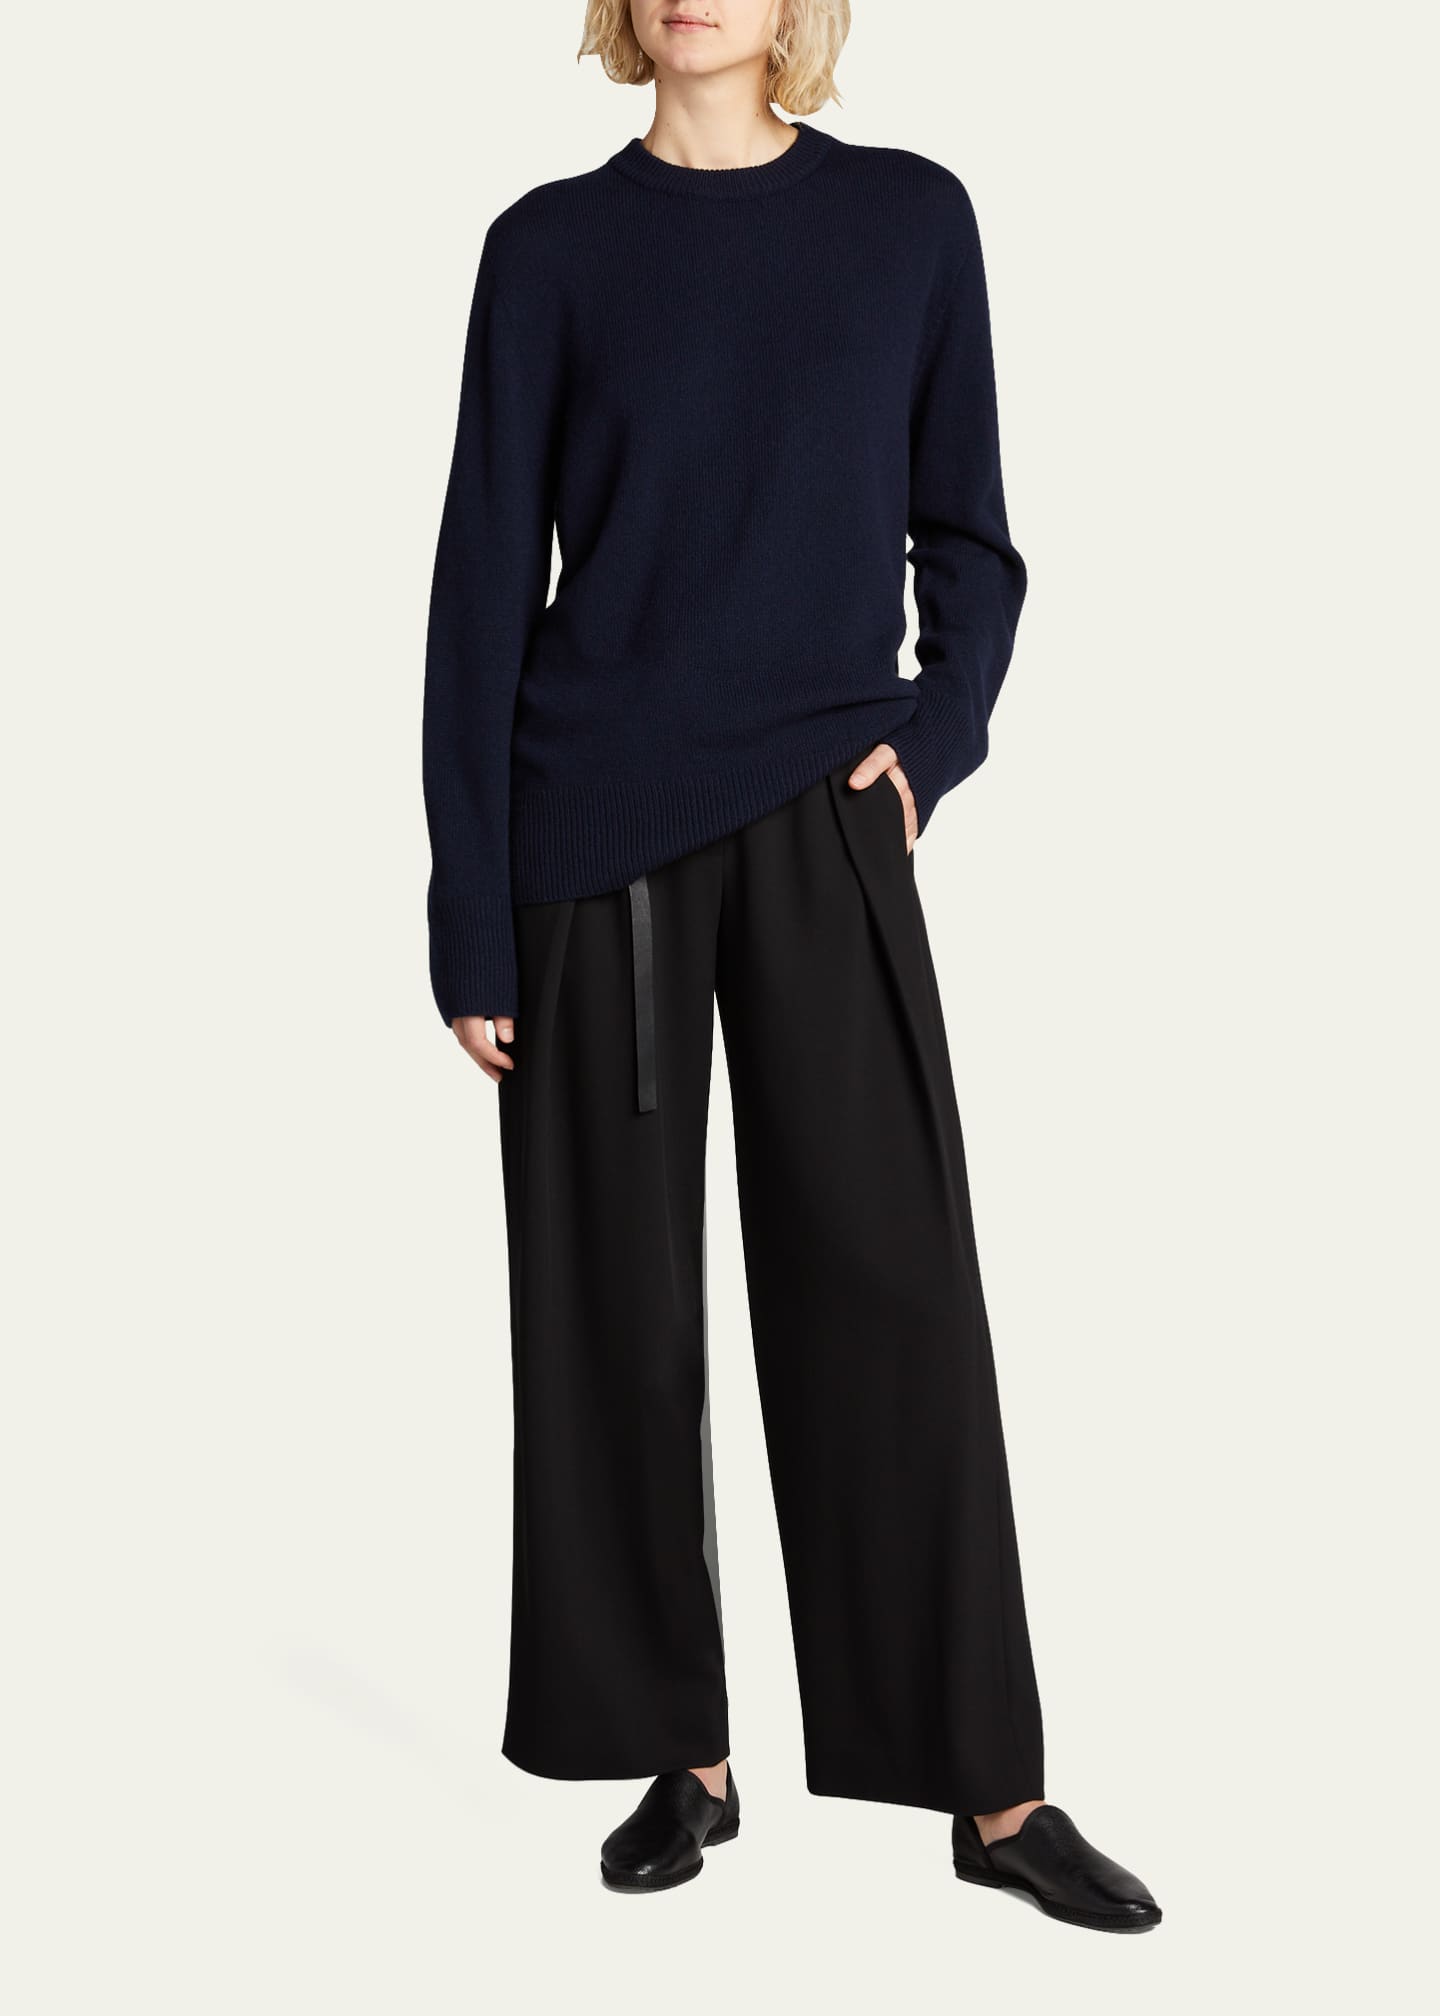 THE ROW Sibem Wool-Cashmere Sweater